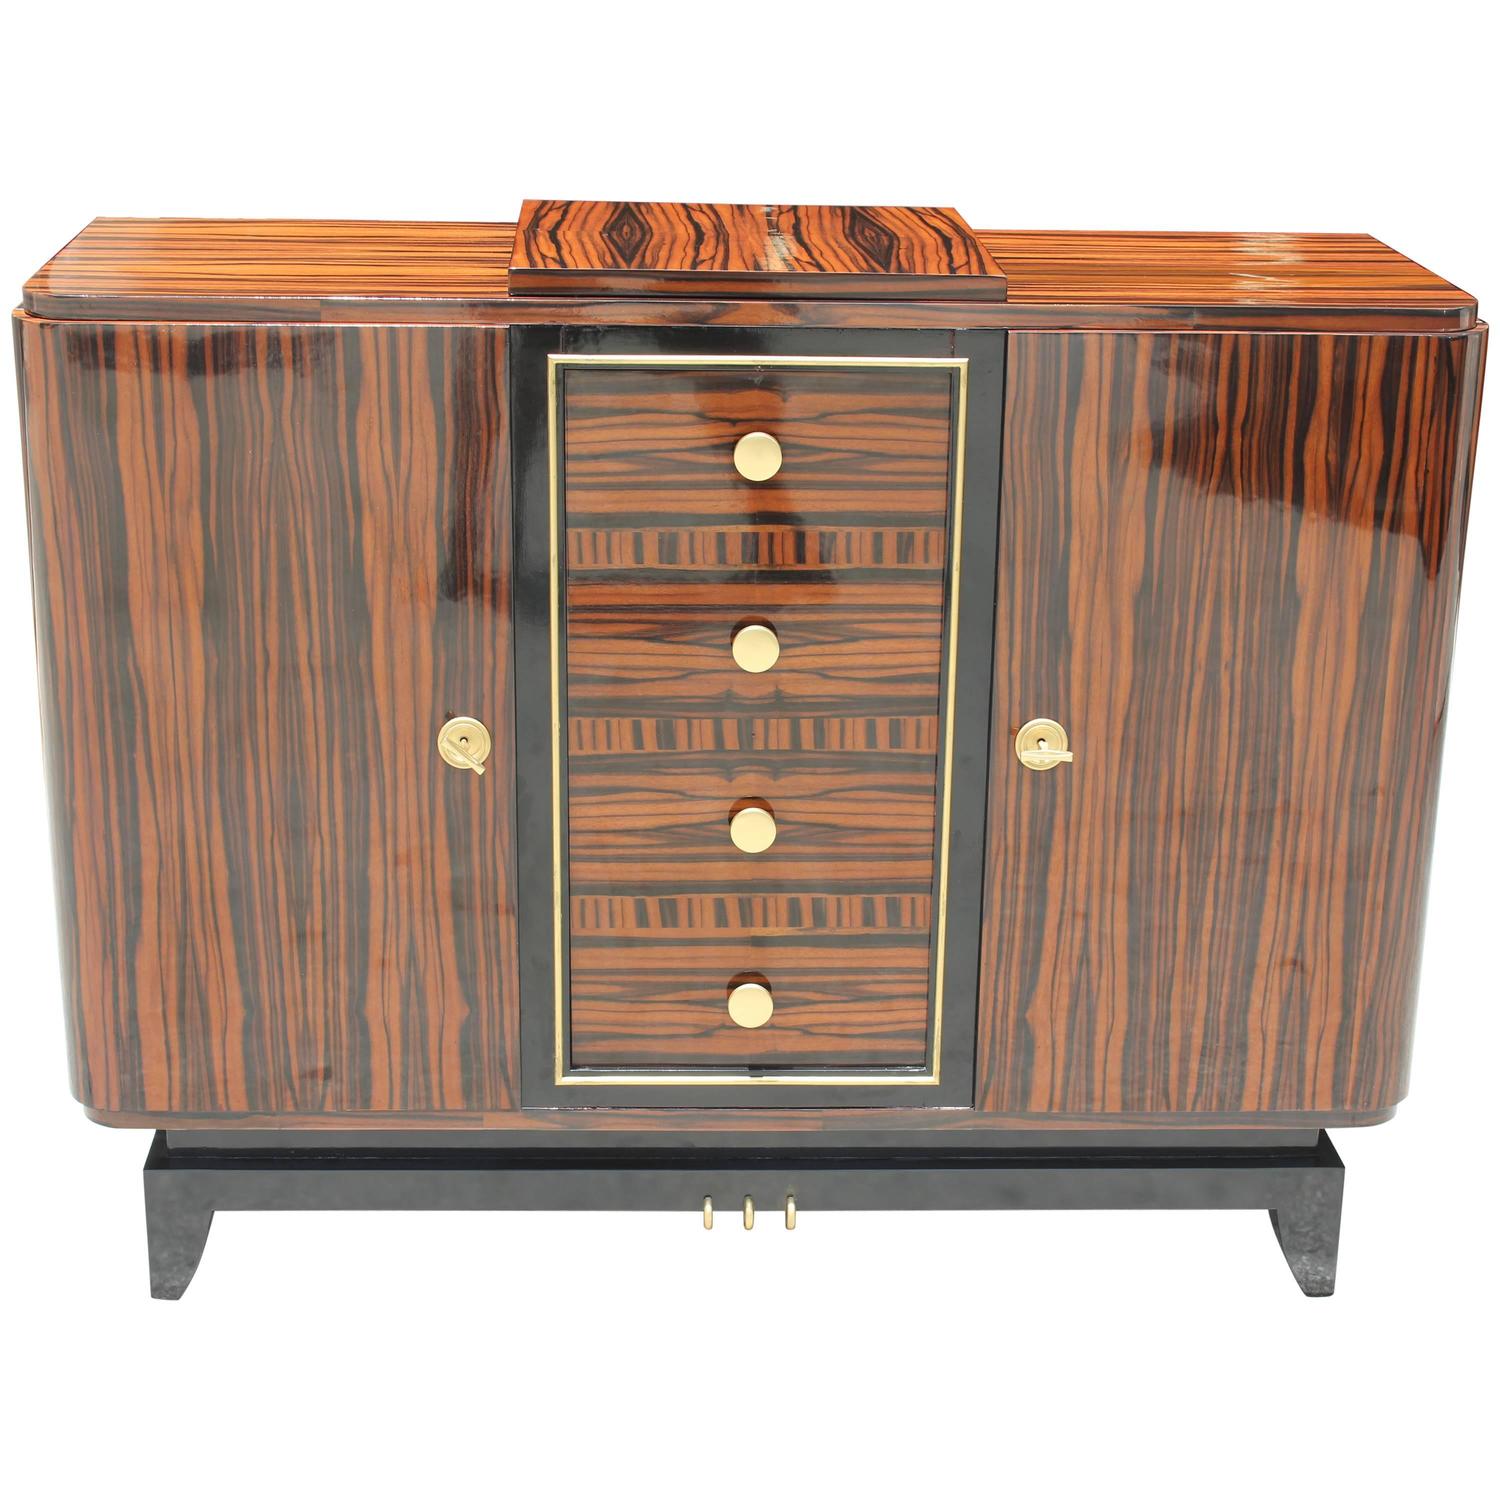 more about french art deco furniture inc OFMKDUK